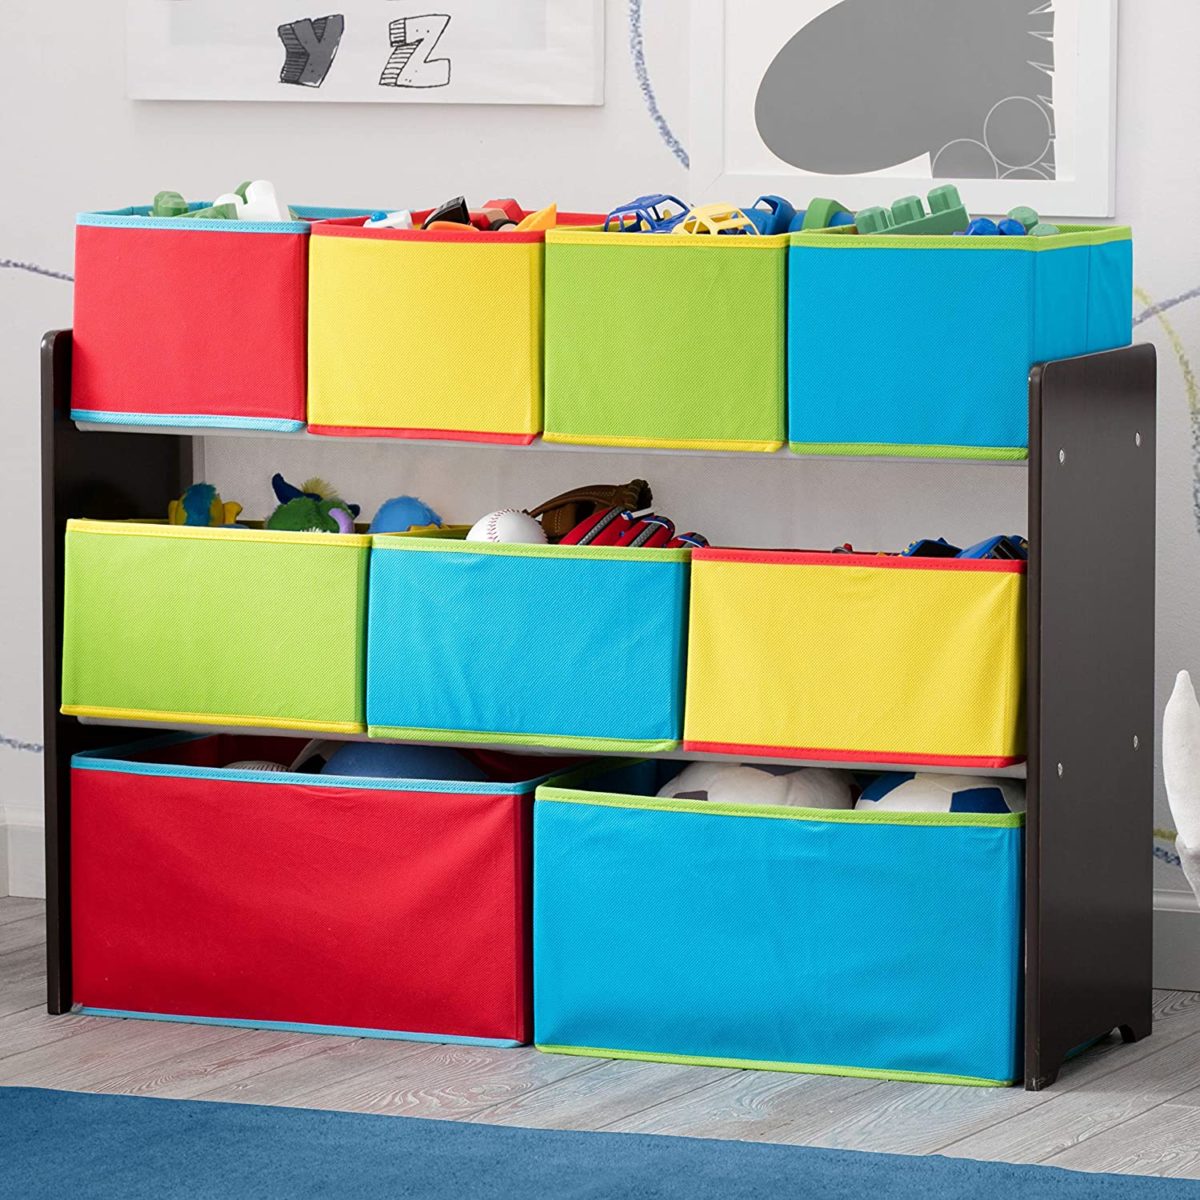 Find the Perfect Kids Toy Box for Any Playroom